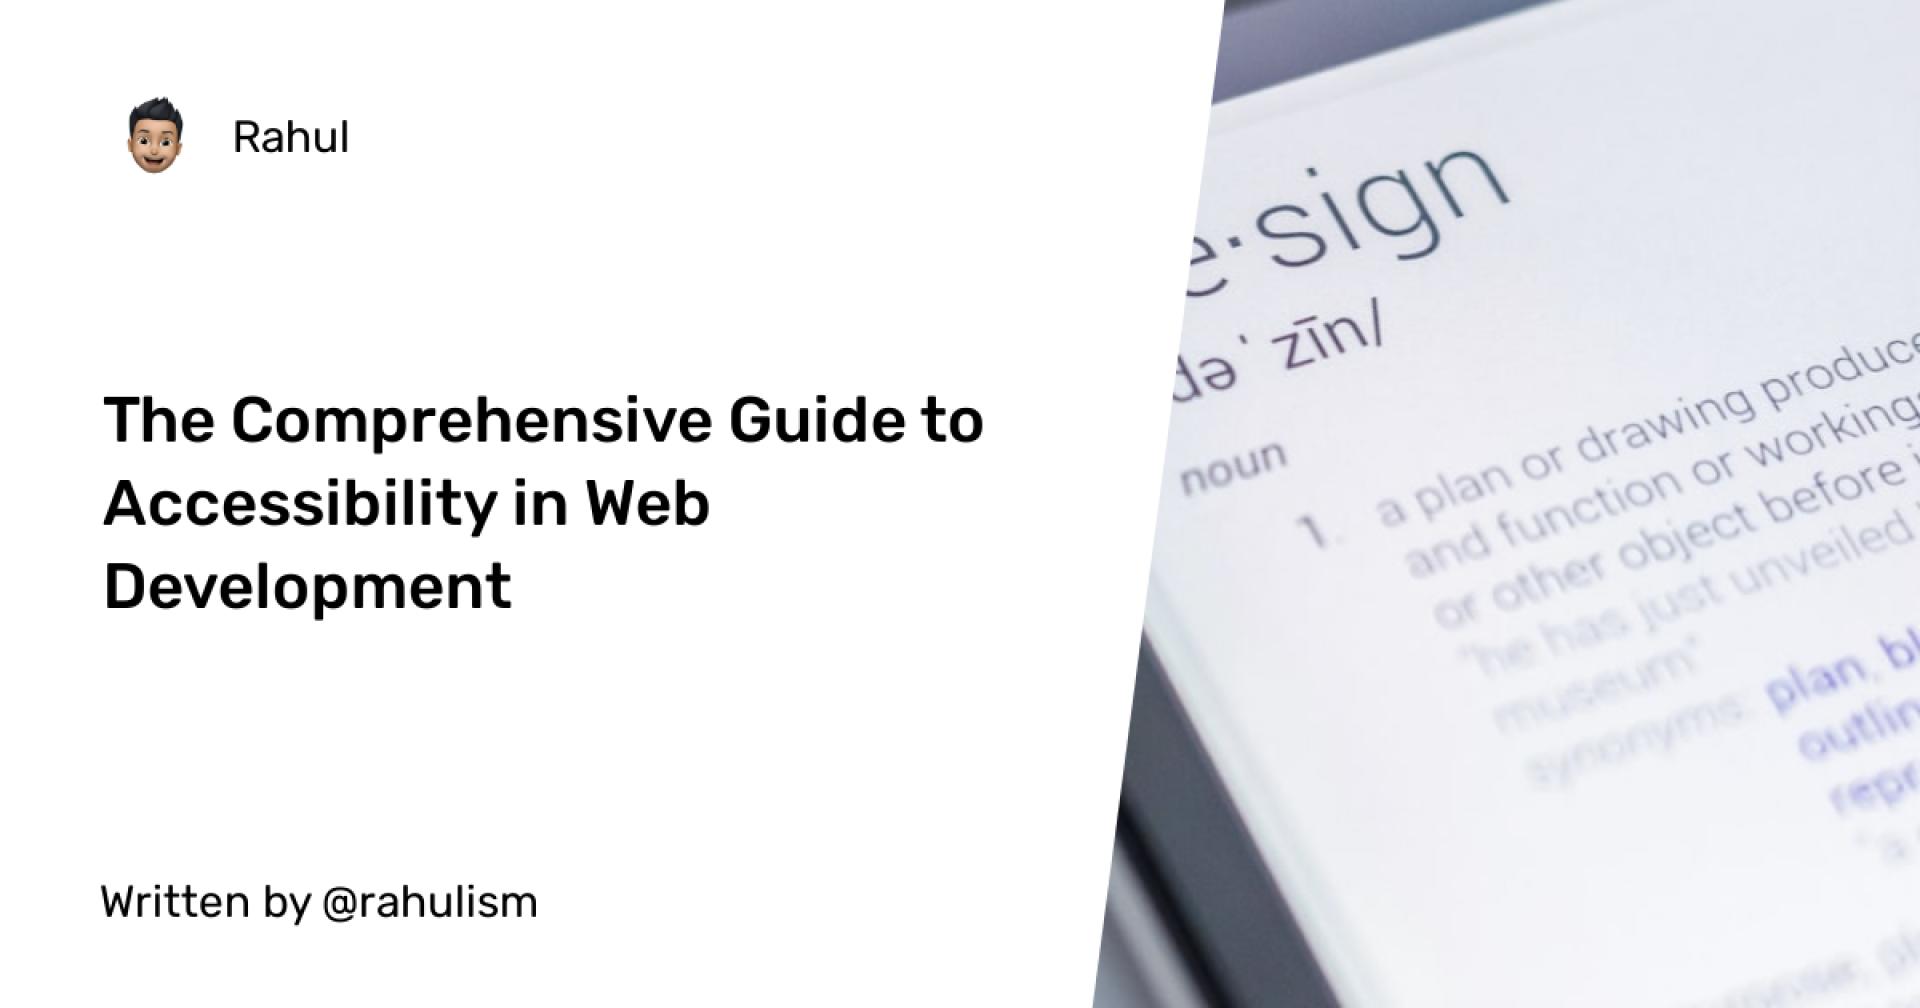 The Comprehensive Guide to Accessibility in Web Development